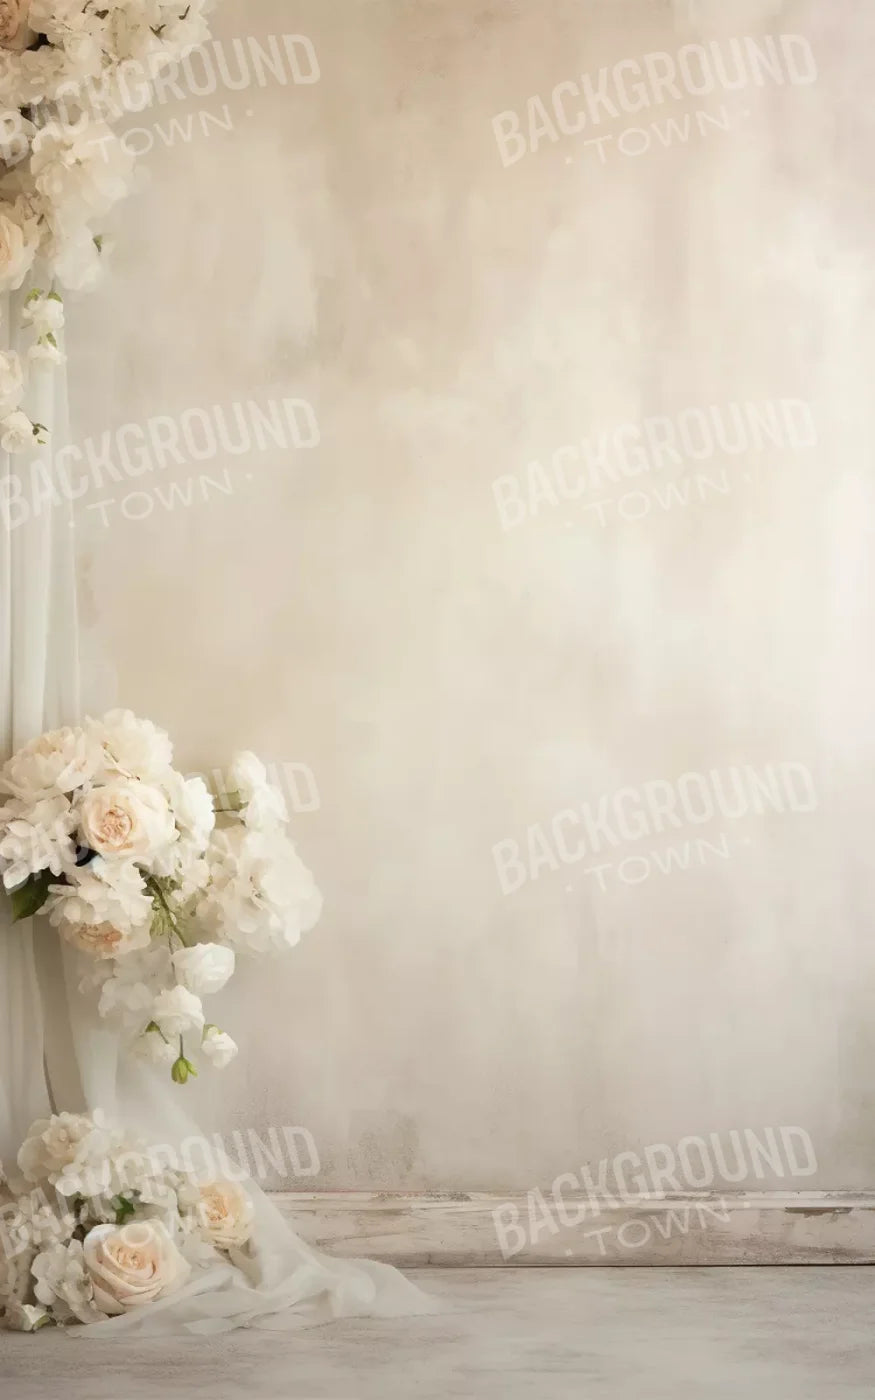 Plaster Wall With Florals 10’X16’ Ultracloth (120 X 192 Inch) Backdrop